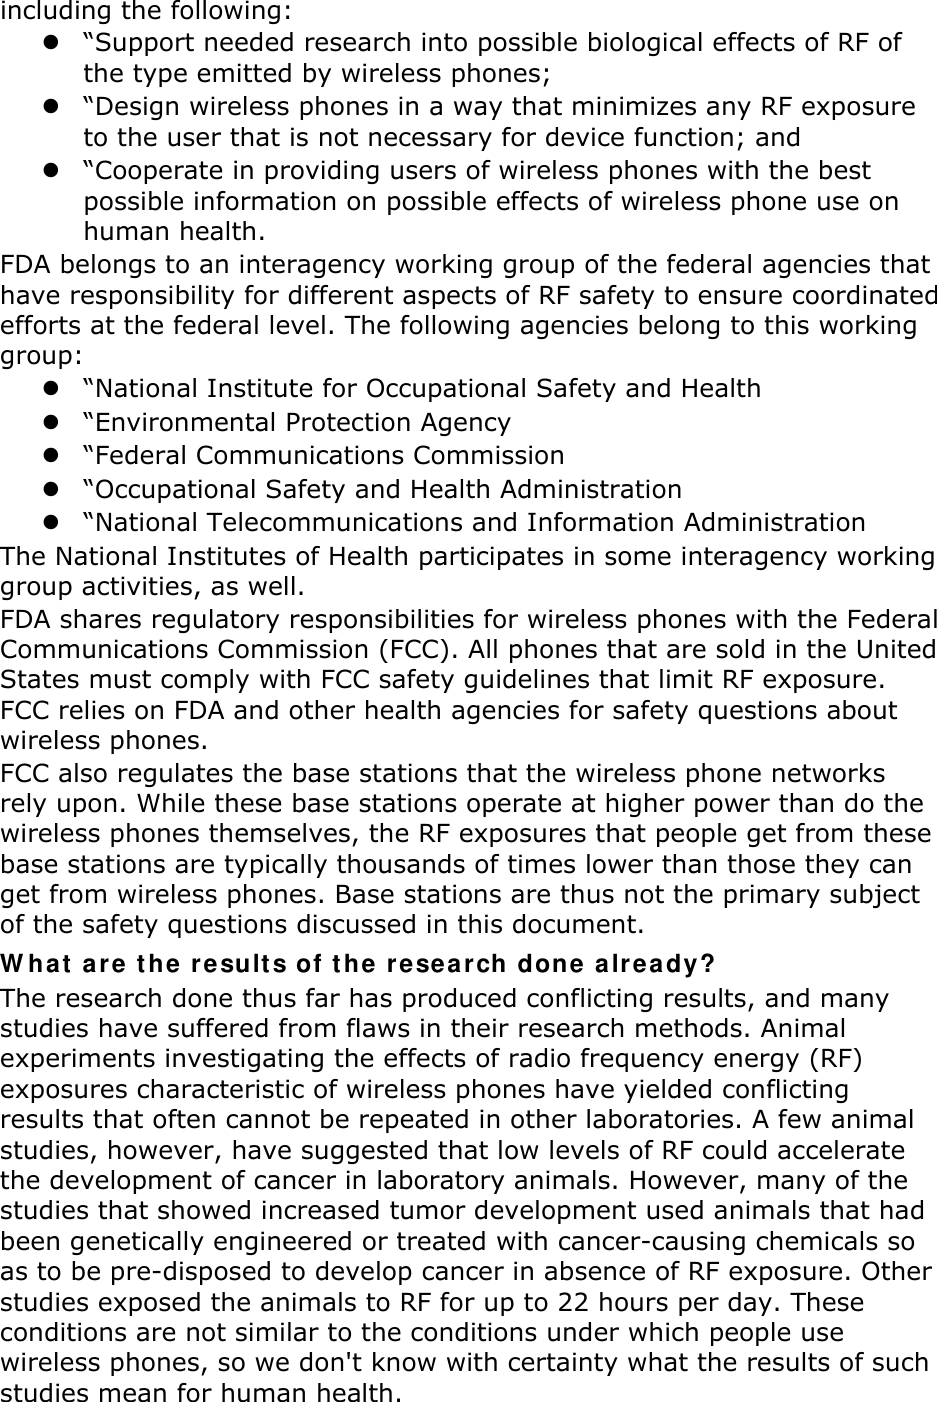 including the following: z “Support needed research into possible biological effects of RF of the type emitted by wireless phones; z “Design wireless phones in a way that minimizes any RF exposure to the user that is not necessary for device function; and z “Cooperate in providing users of wireless phones with the best possible information on possible effects of wireless phone use on human health. FDA belongs to an interagency working group of the federal agencies that have responsibility for different aspects of RF safety to ensure coordinated efforts at the federal level. The following agencies belong to this working group: z “National Institute for Occupational Safety and Health z “Environmental Protection Agency z “Federal Communications Commission z “Occupational Safety and Health Administration z “National Telecommunications and Information Administration The National Institutes of Health participates in some interagency working group activities, as well. FDA shares regulatory responsibilities for wireless phones with the Federal Communications Commission (FCC). All phones that are sold in the United States must comply with FCC safety guidelines that limit RF exposure. FCC relies on FDA and other health agencies for safety questions about wireless phones. FCC also regulates the base stations that the wireless phone networks rely upon. While these base stations operate at higher power than do the wireless phones themselves, the RF exposures that people get from these base stations are typically thousands of times lower than those they can get from wireless phones. Base stations are thus not the primary subject of the safety questions discussed in this document. What are the results of the research done already? The research done thus far has produced conflicting results, and many studies have suffered from flaws in their research methods. Animal experiments investigating the effects of radio frequency energy (RF) exposures characteristic of wireless phones have yielded conflicting results that often cannot be repeated in other laboratories. A few animal studies, however, have suggested that low levels of RF could accelerate the development of cancer in laboratory animals. However, many of the studies that showed increased tumor development used animals that had been genetically engineered or treated with cancer-causing chemicals so as to be pre-disposed to develop cancer in absence of RF exposure. Other studies exposed the animals to RF for up to 22 hours per day. These conditions are not similar to the conditions under which people use wireless phones, so we don&apos;t know with certainty what the results of such studies mean for human health. 